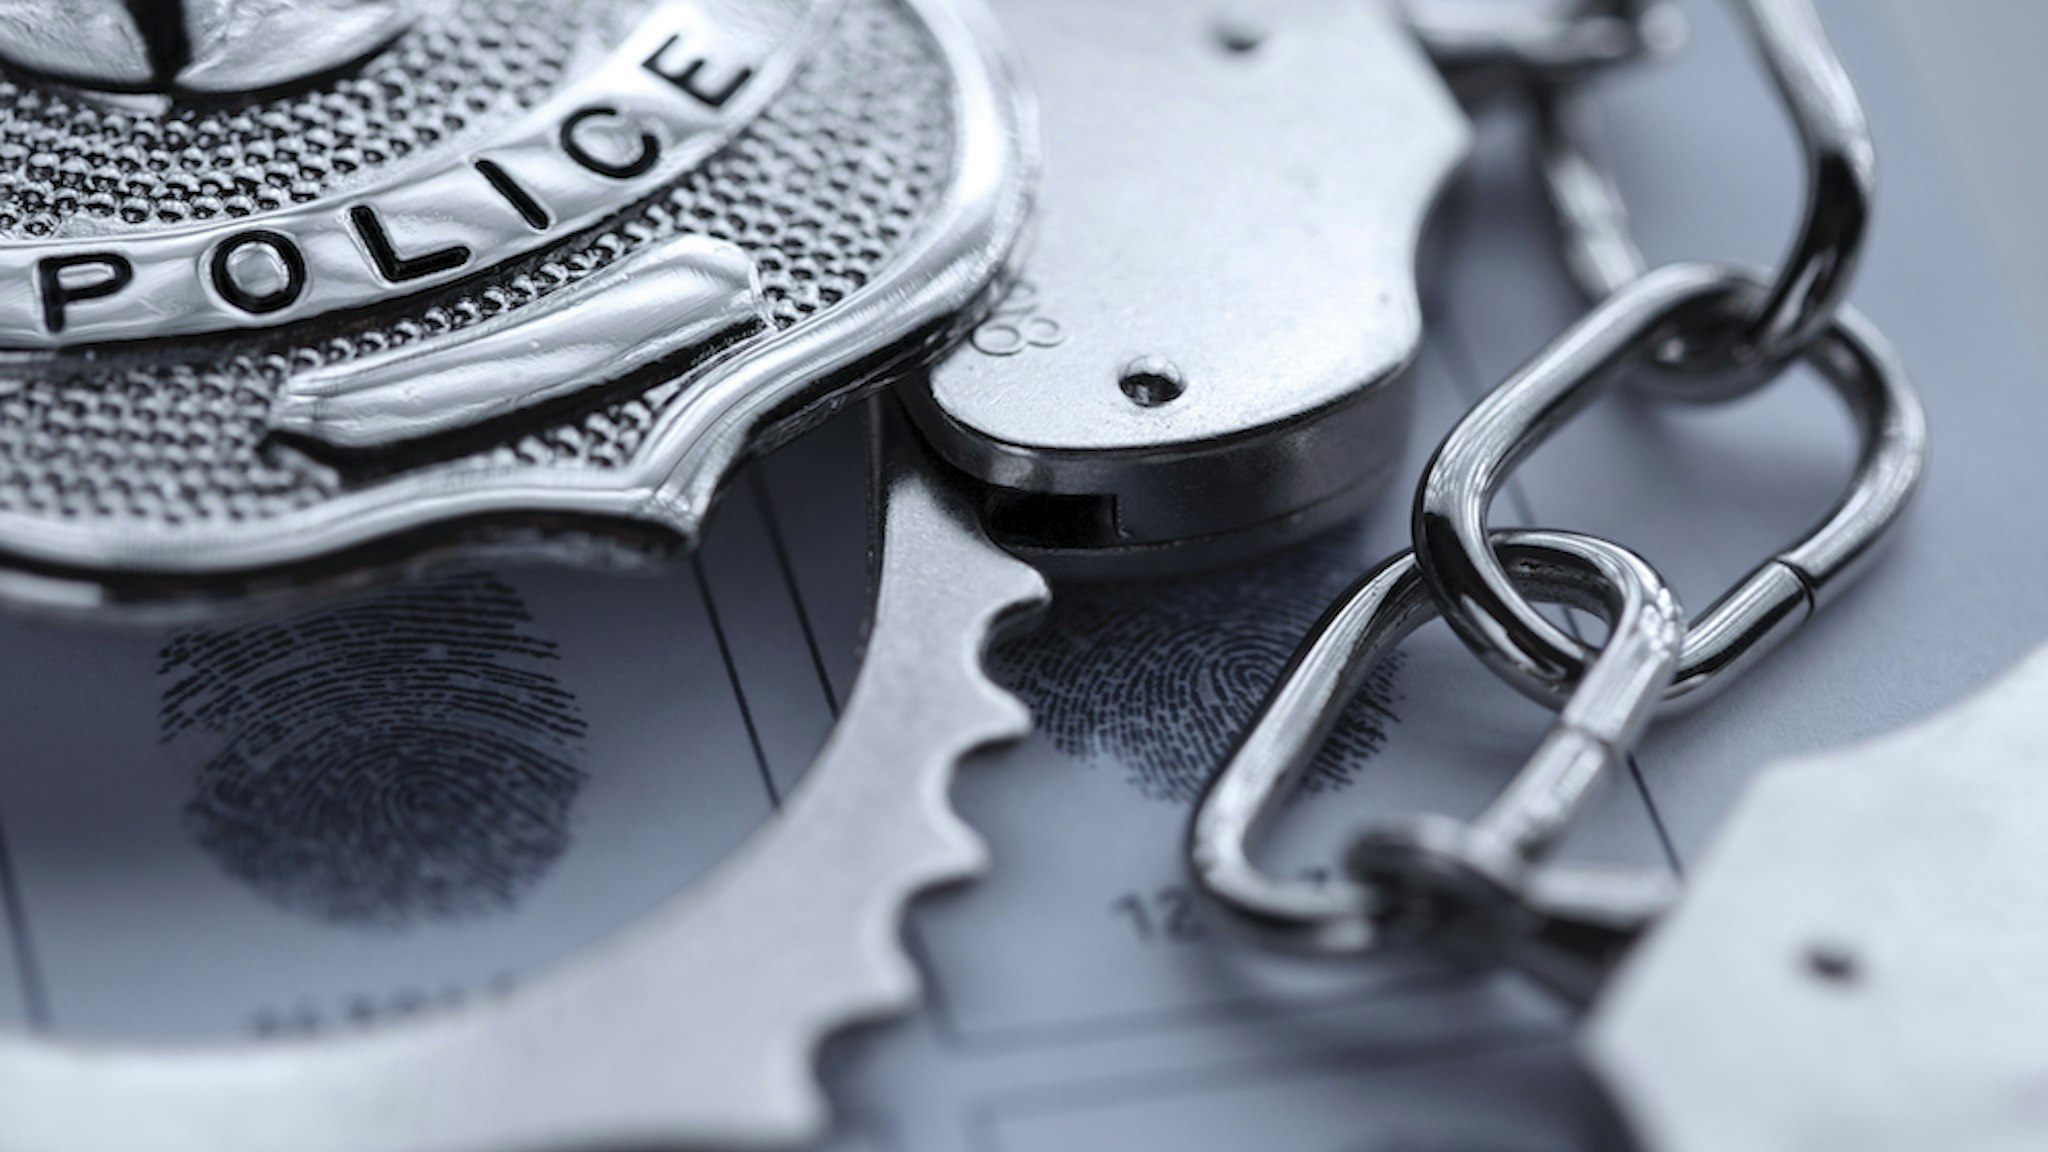 Police badge and cuffs (amphotora/Getty Images)